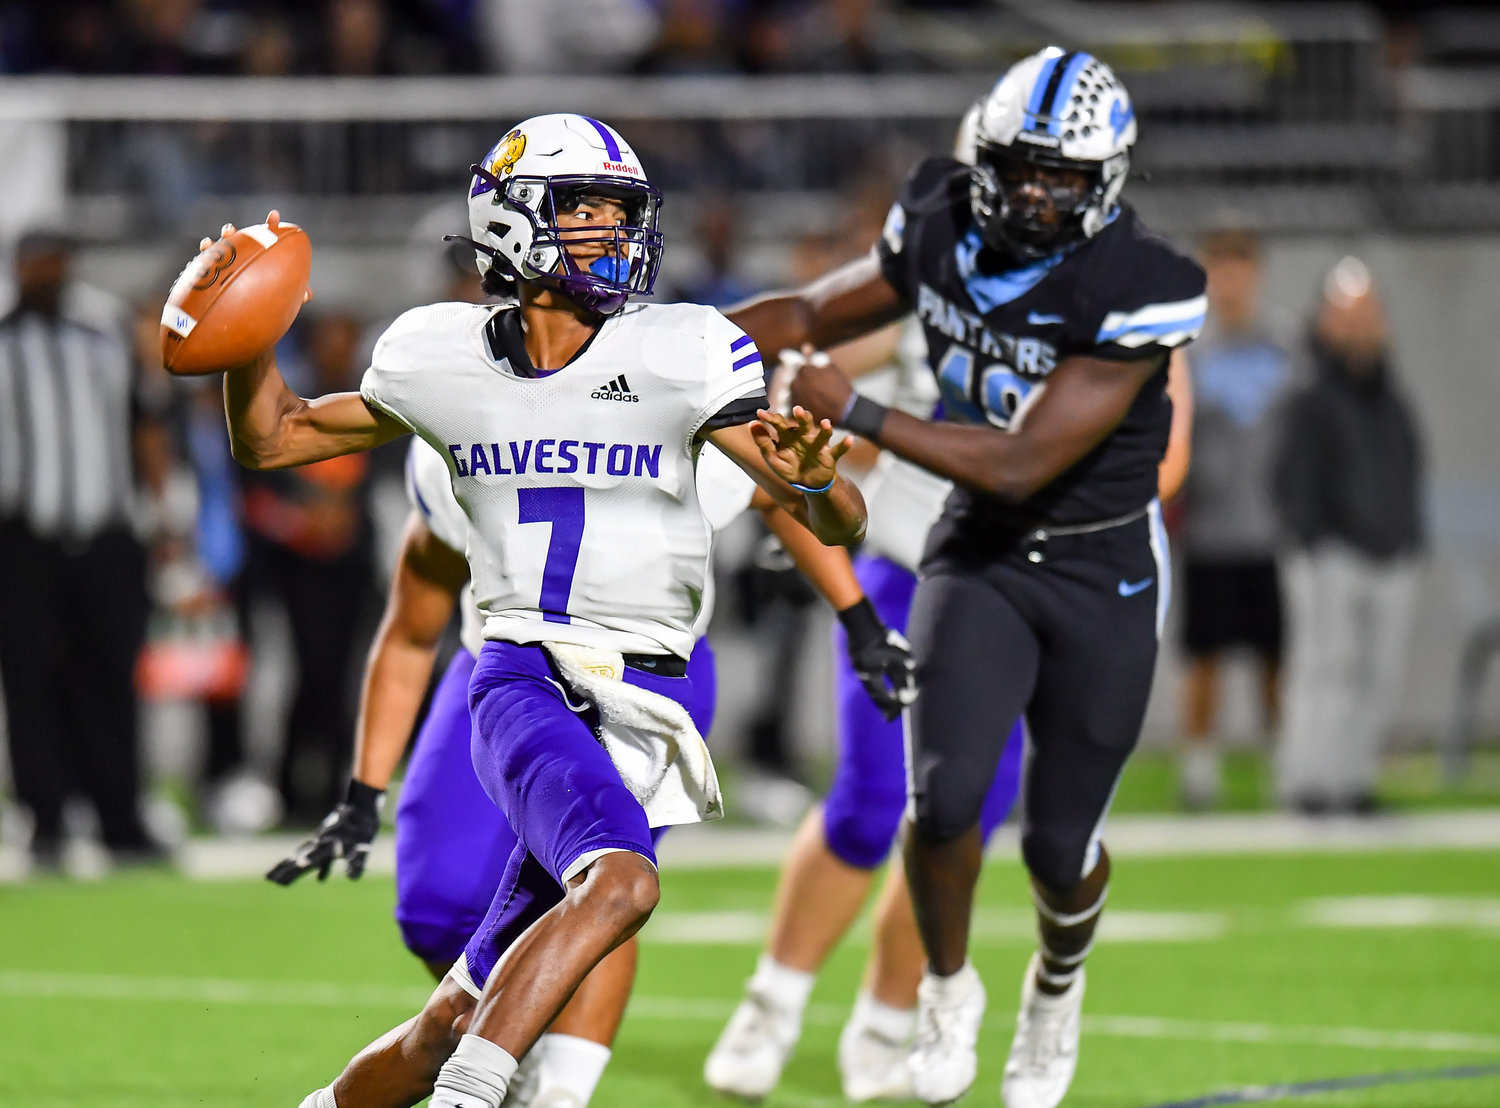 Katy, Tx. Nov 11, 2021: Galveston Ball, QB Seth Williams #7 looks for an open receiver during a playoff game between Paetow and Galveston Ball at Legacy Stadium in Katy. (Photo by Mark Goodman / Katy Times)